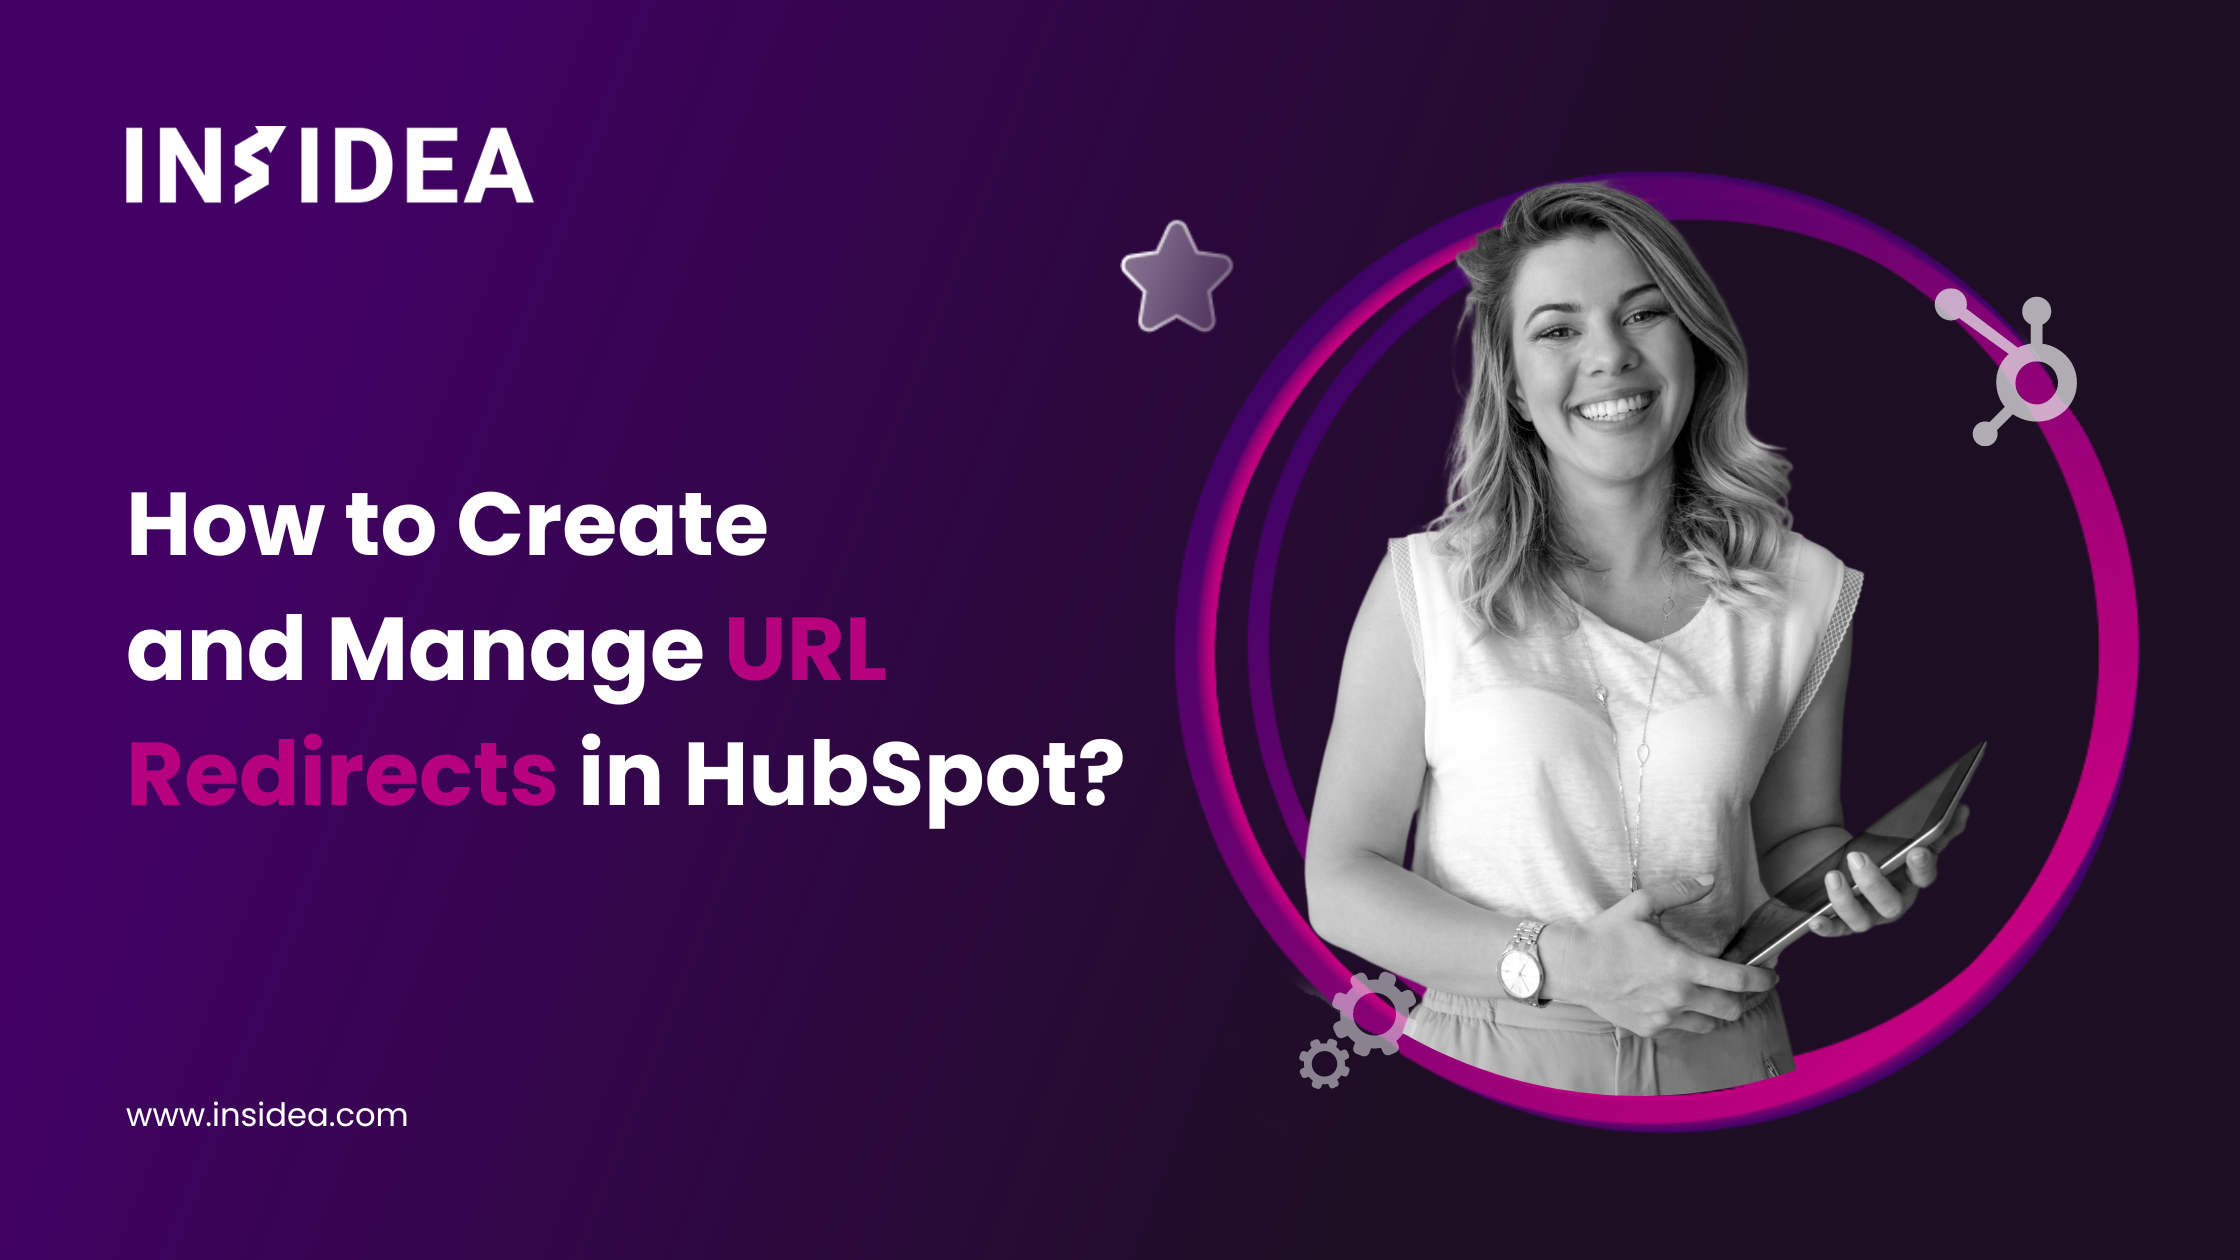 How to Create and Manage URL Redirects in HubSpot